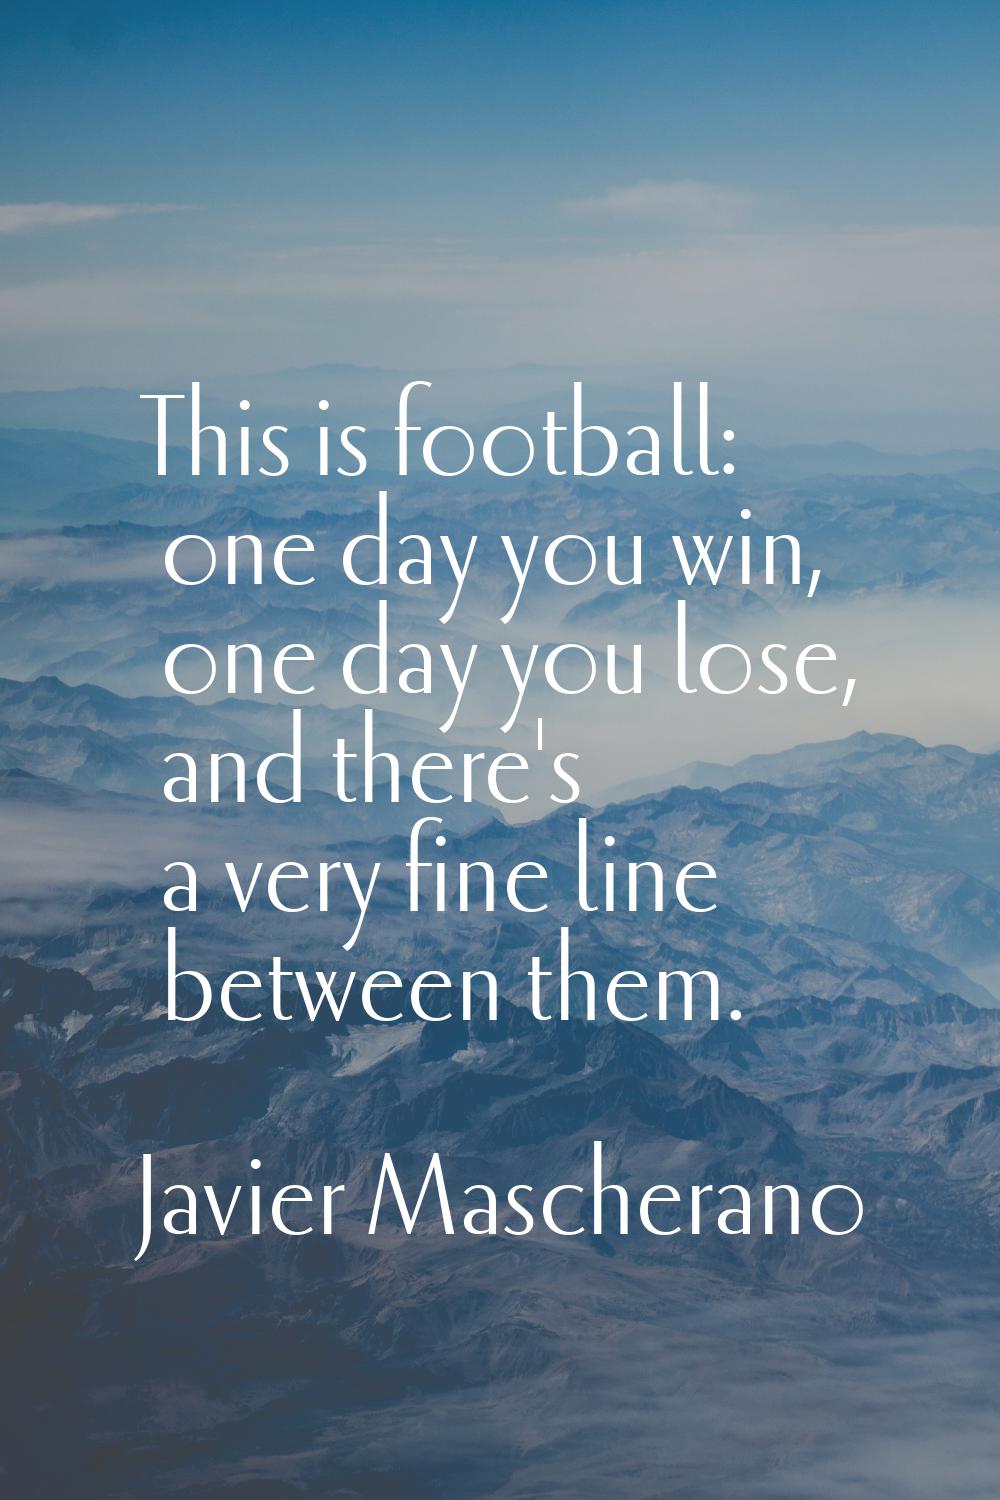 This is football: one day you win, one day you lose, and there's a very fine line between them.